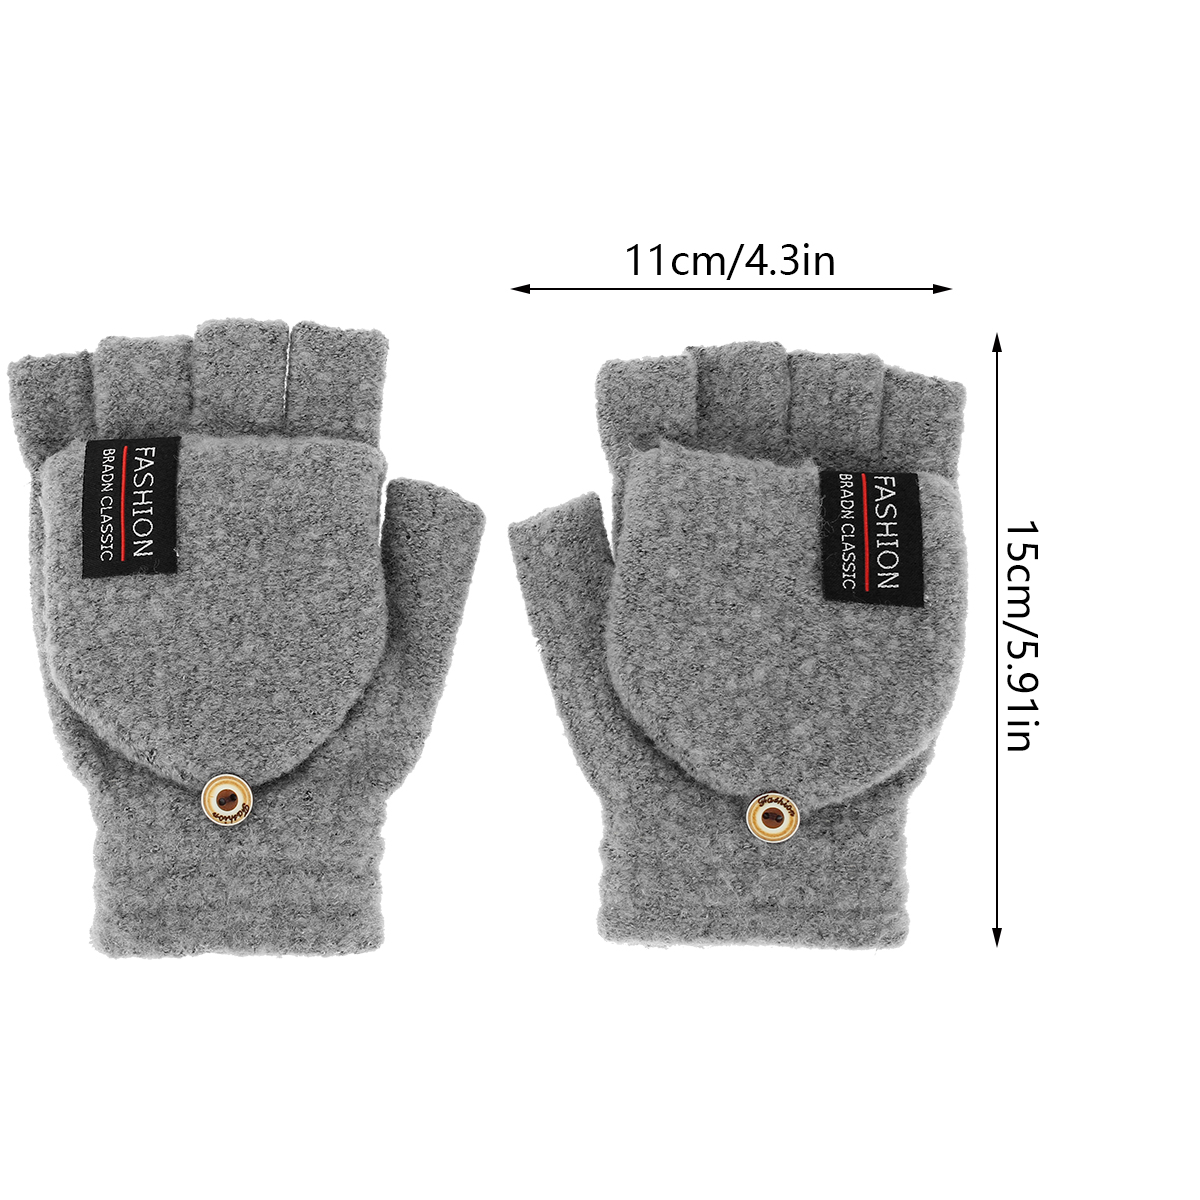 Littleduckling USB Heated Gloves 5V Low Voltage Electric Thermal